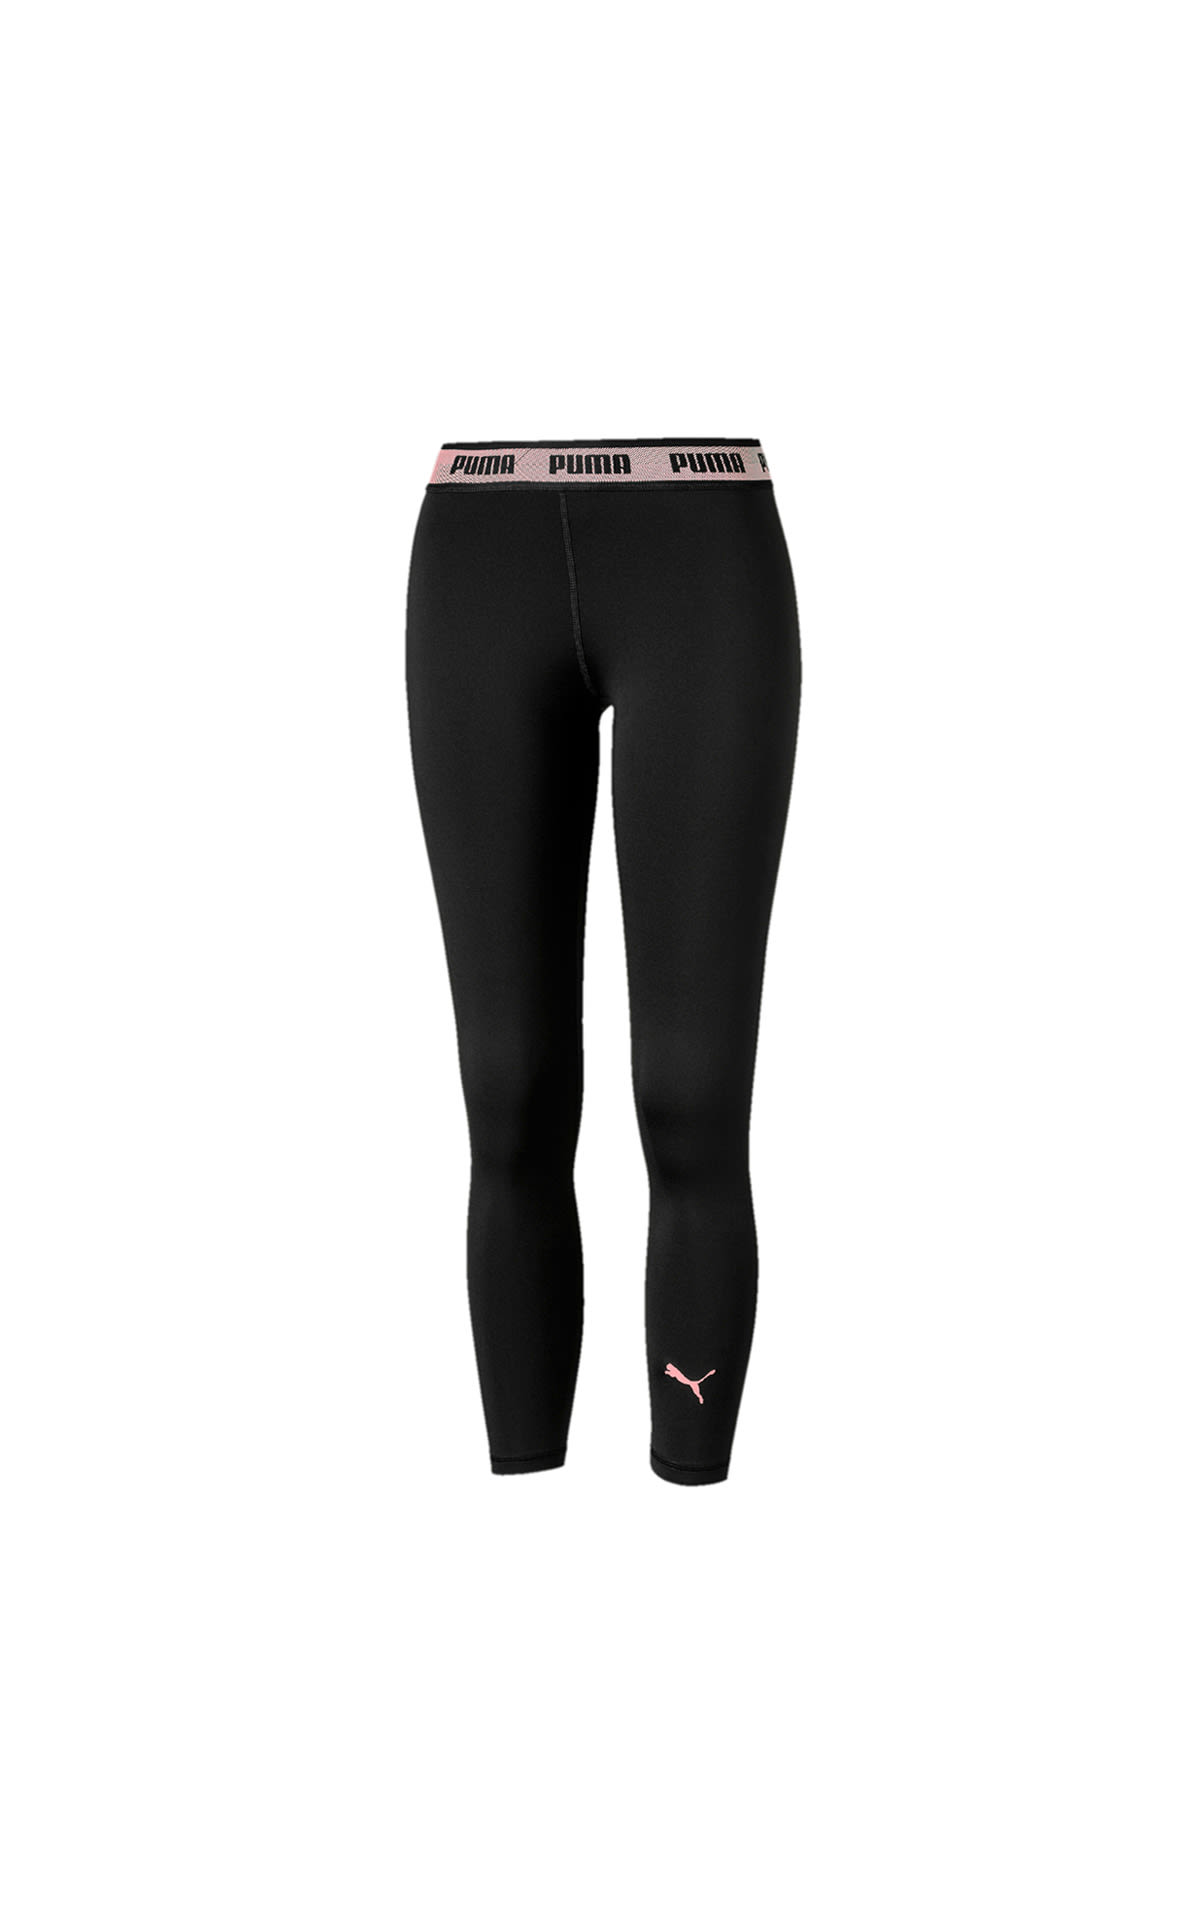 PUMA soft sports leggings at The Bicester Village Shopping Collection